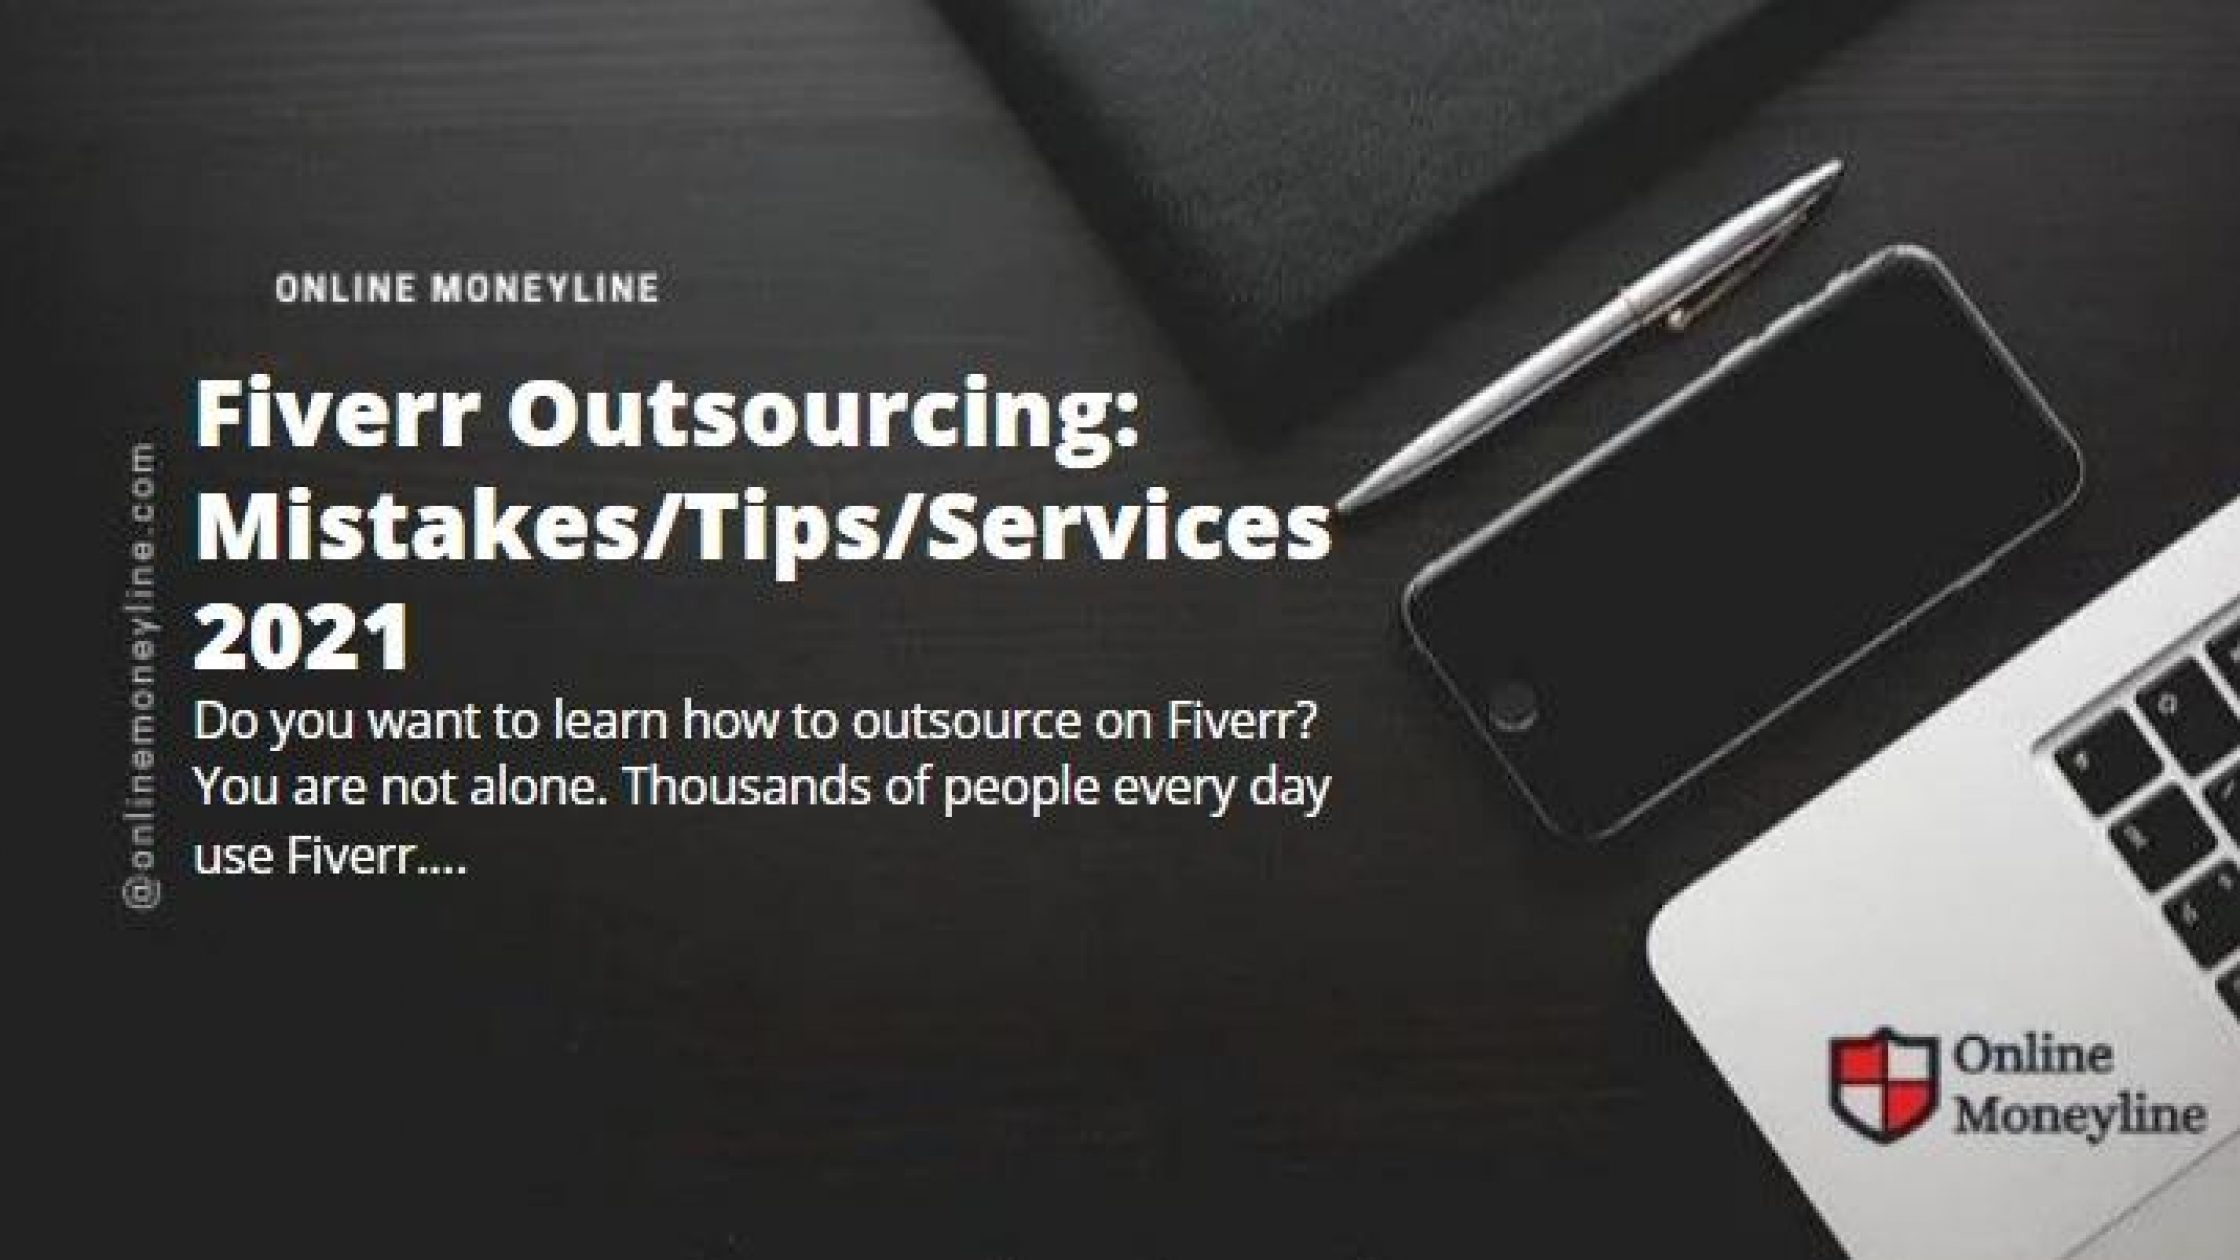 Fiverr Outsourcing: Mistakes/Tips/Services 2021